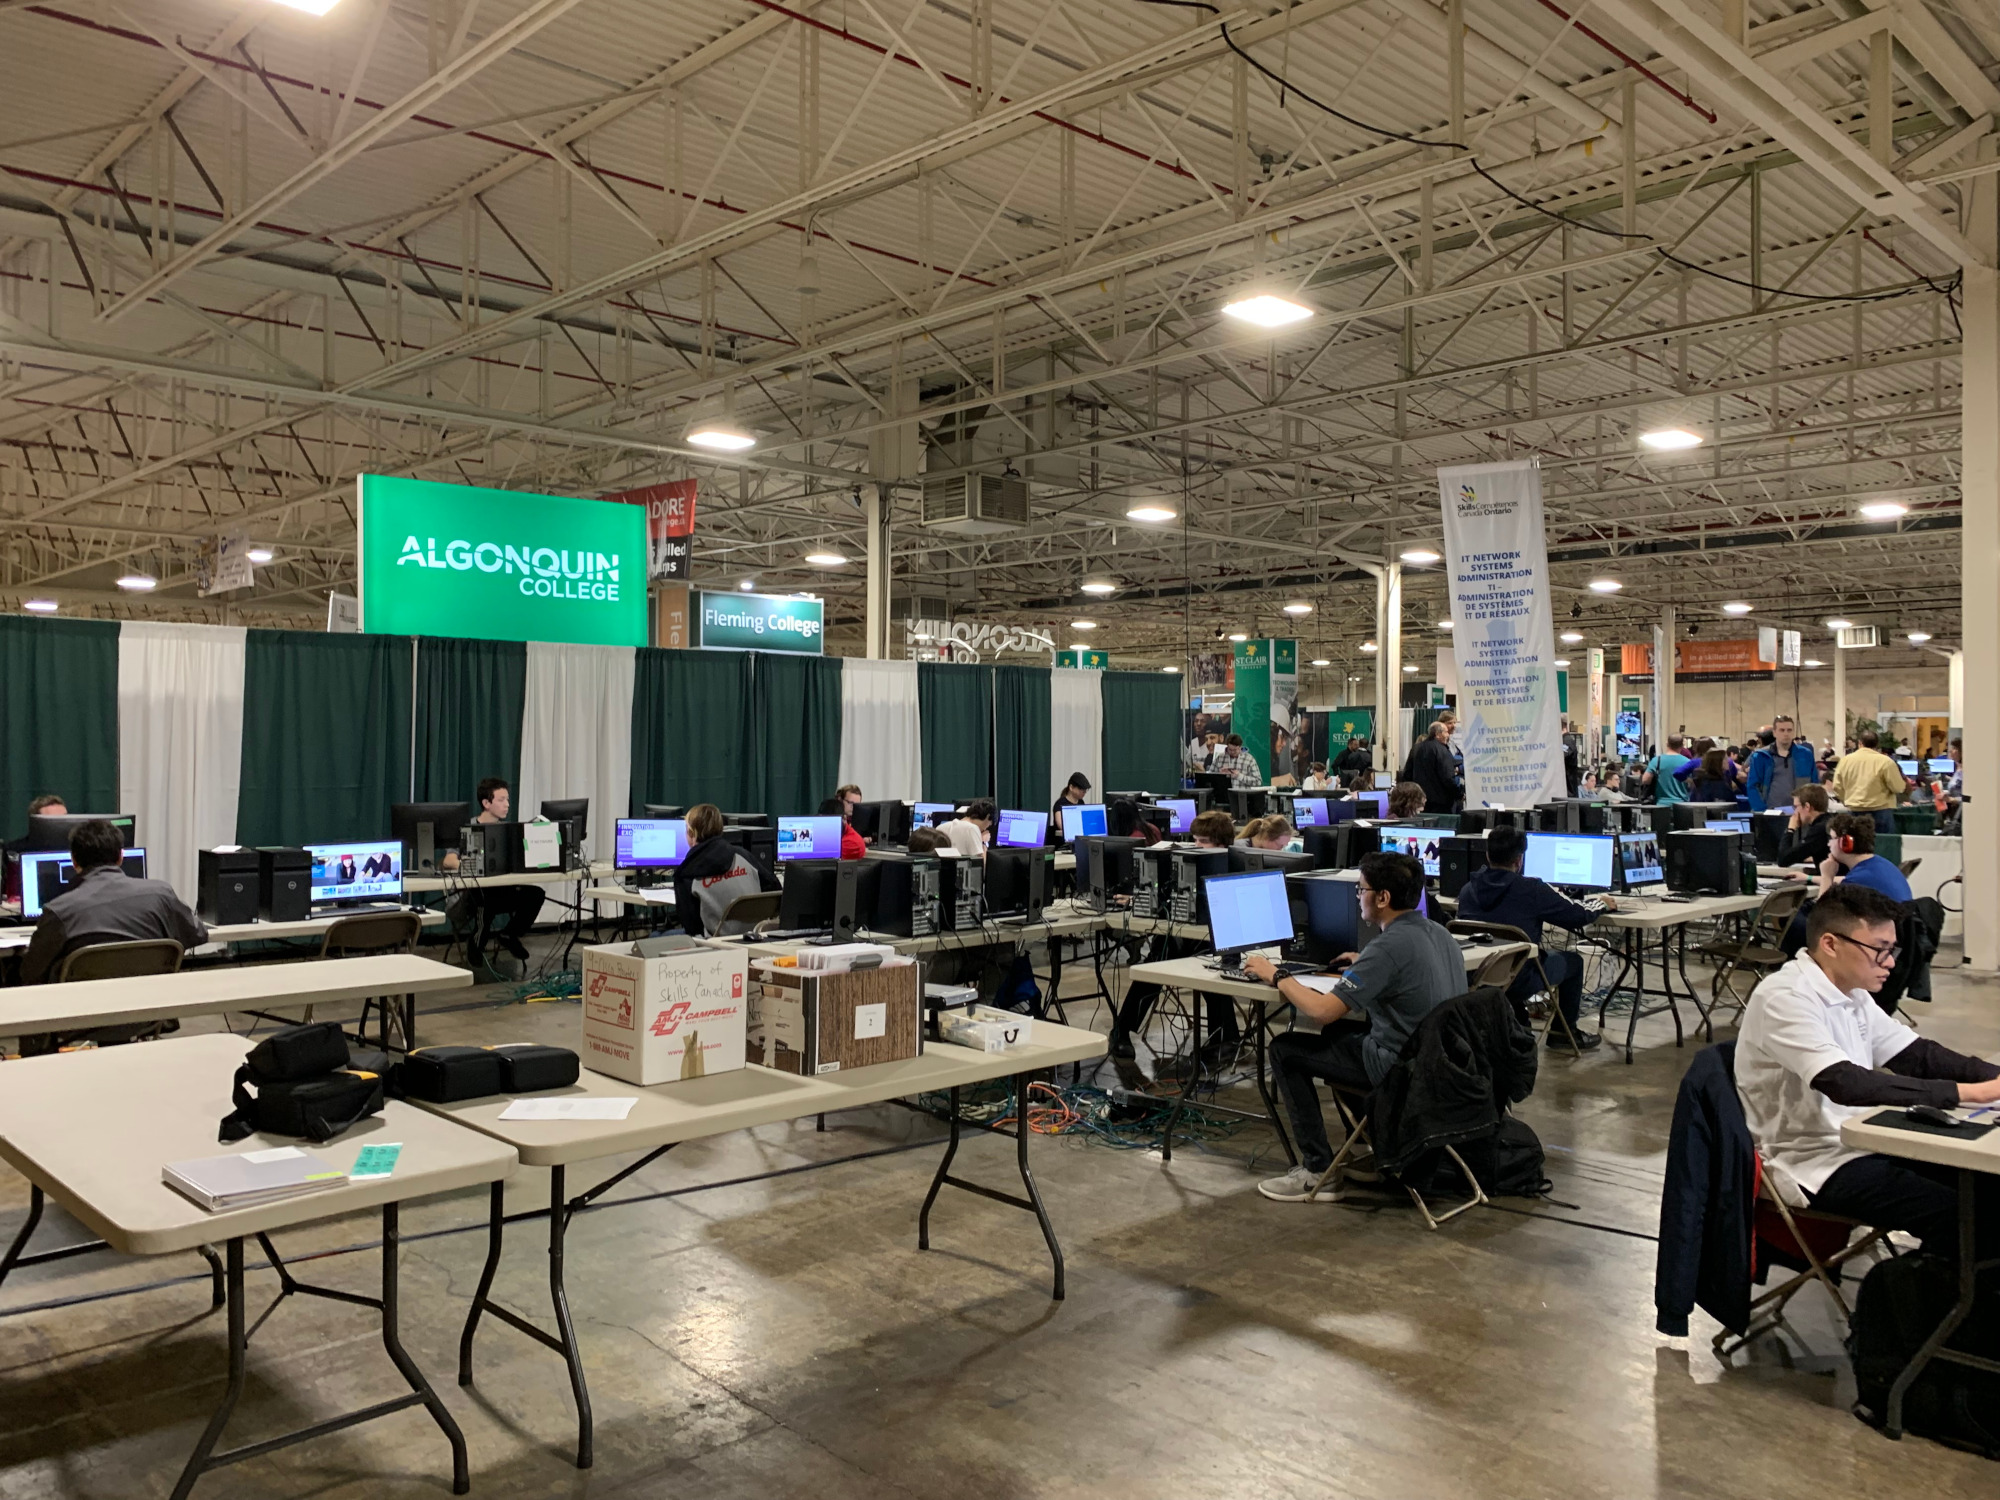 Skills Ontario 2019 Competition. IT Network Systems Administration competition area.